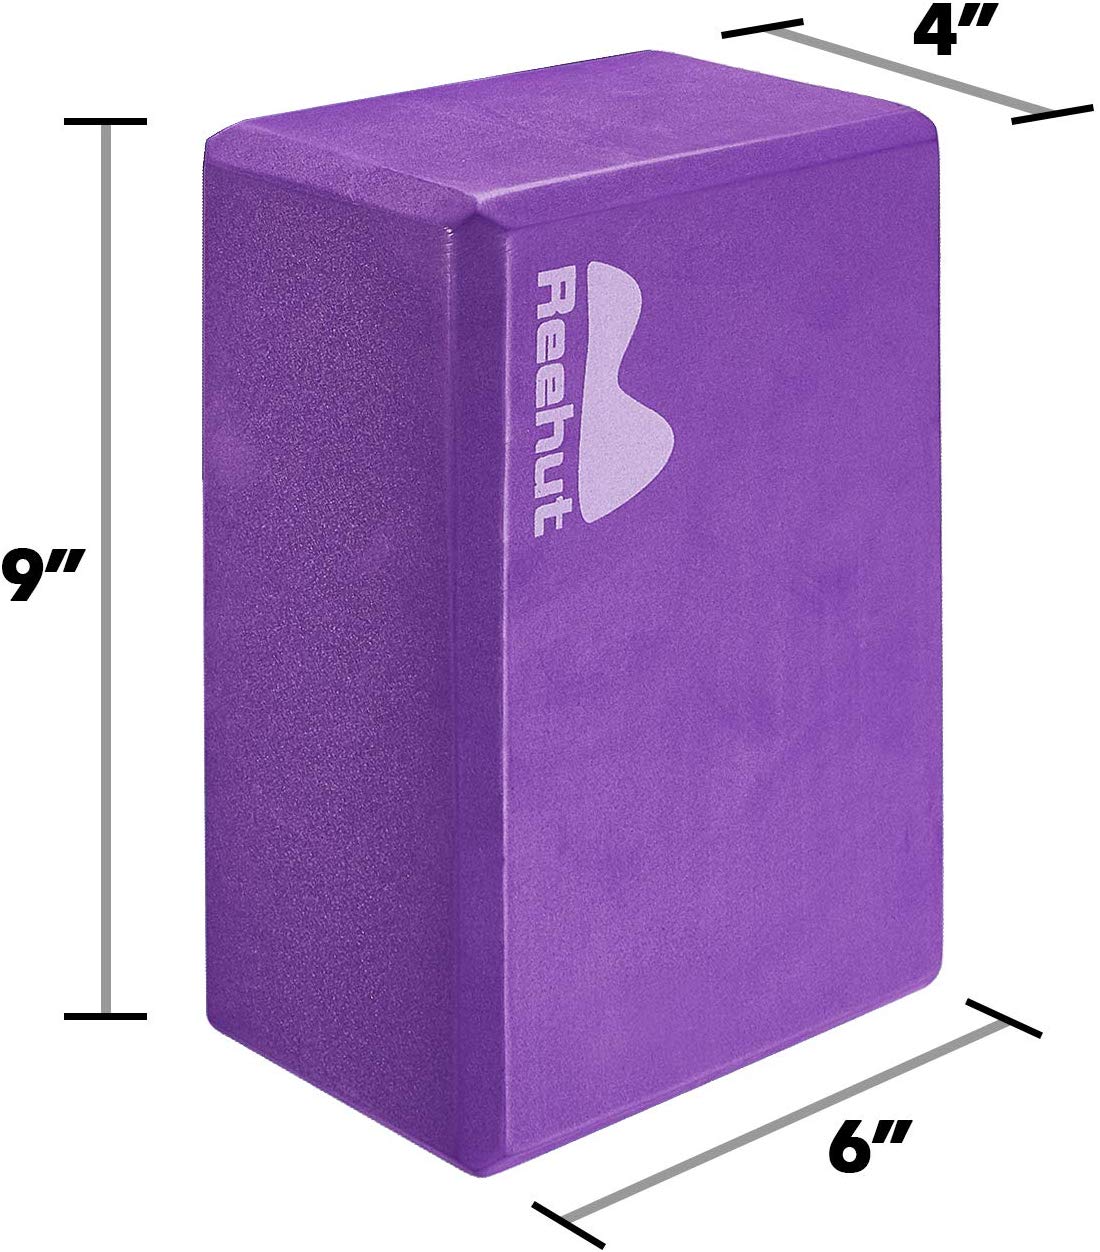 Supports Deepen Poses Set of 2 High Density EVA Foam Blocks Non-Slip Surface for Yoga Improve Strength and Aid Balance and Flexibility Mind Reader 2YOBRICK-PUR Pilates 2 Pack Purple Meditation 